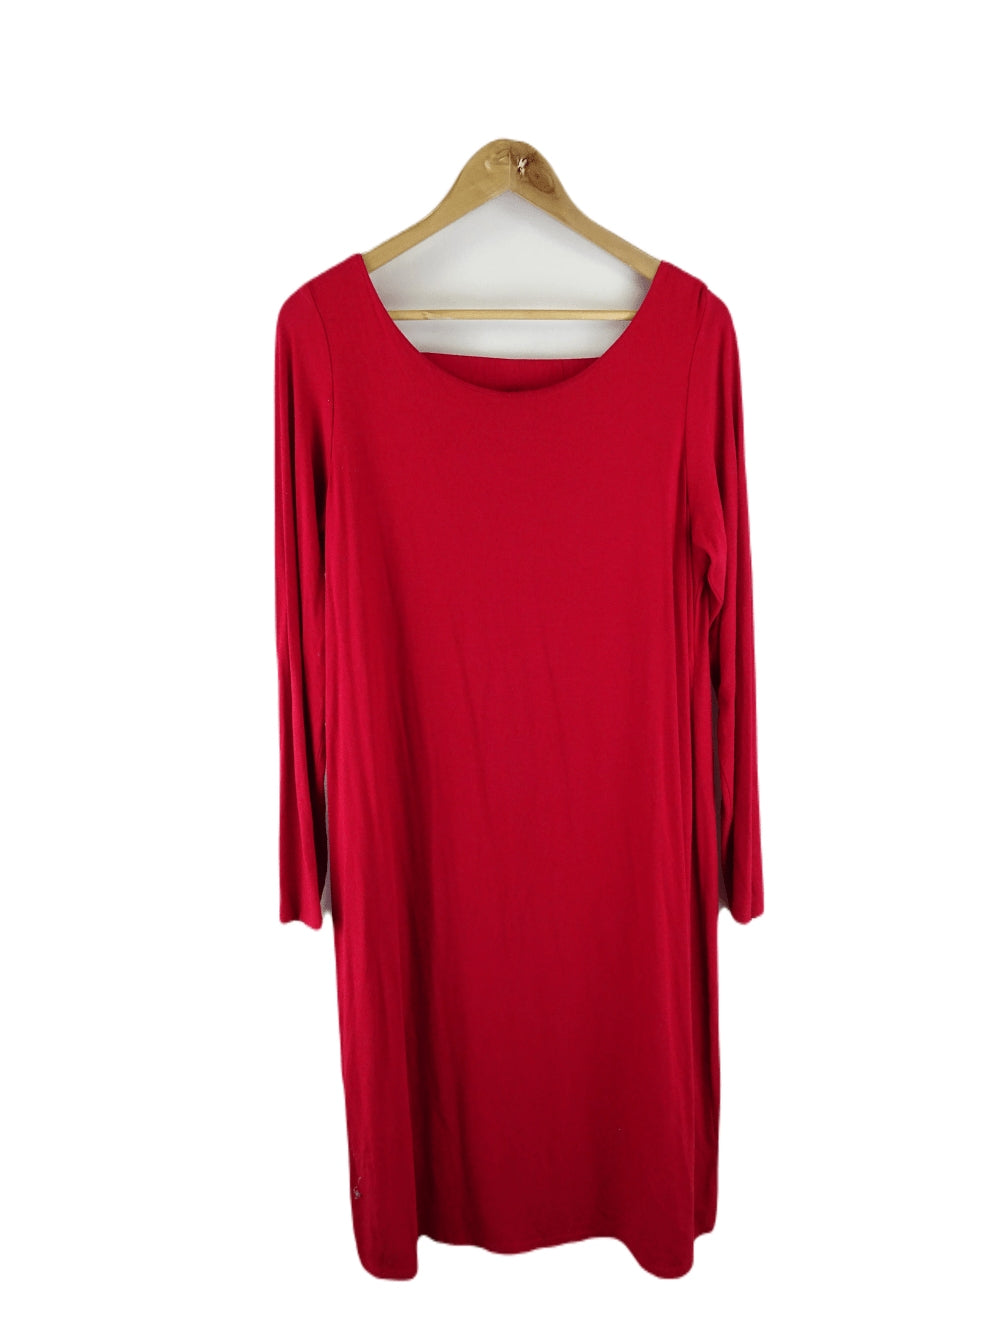 Eileen Fisher Red Dress L